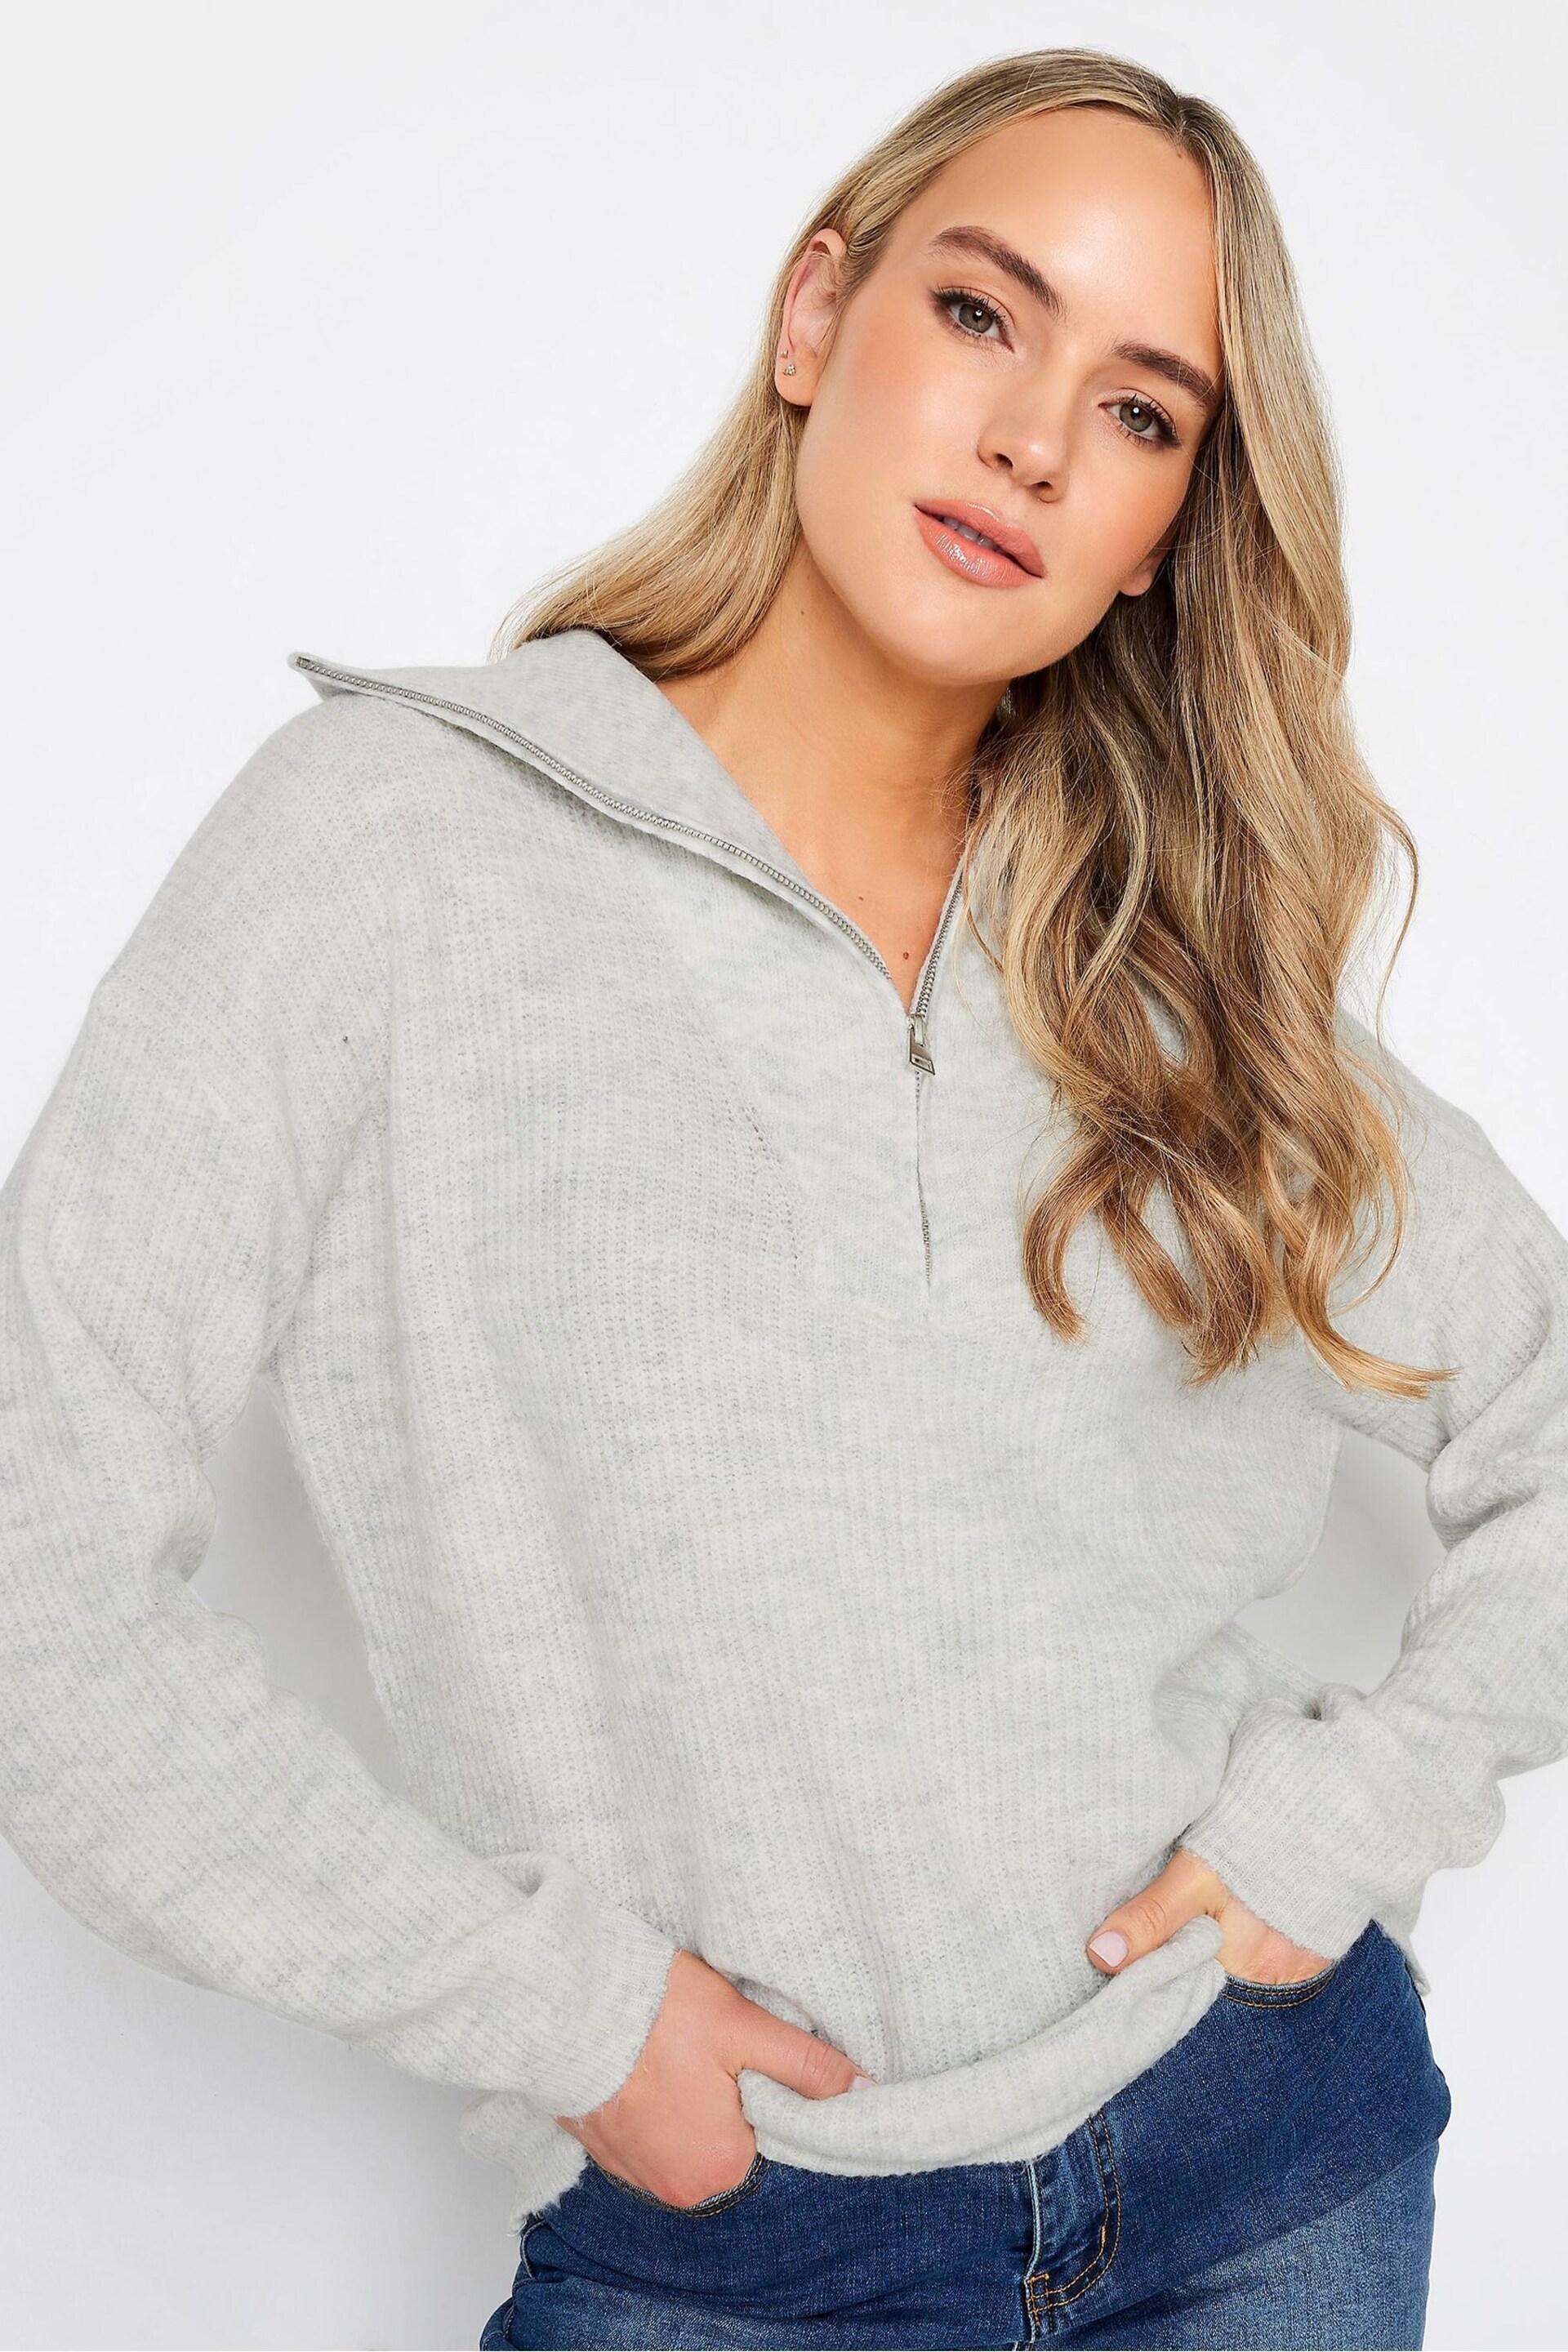 Long Tall Sally Grey Zip Funnel Neck Jumper - Image 1 of 5